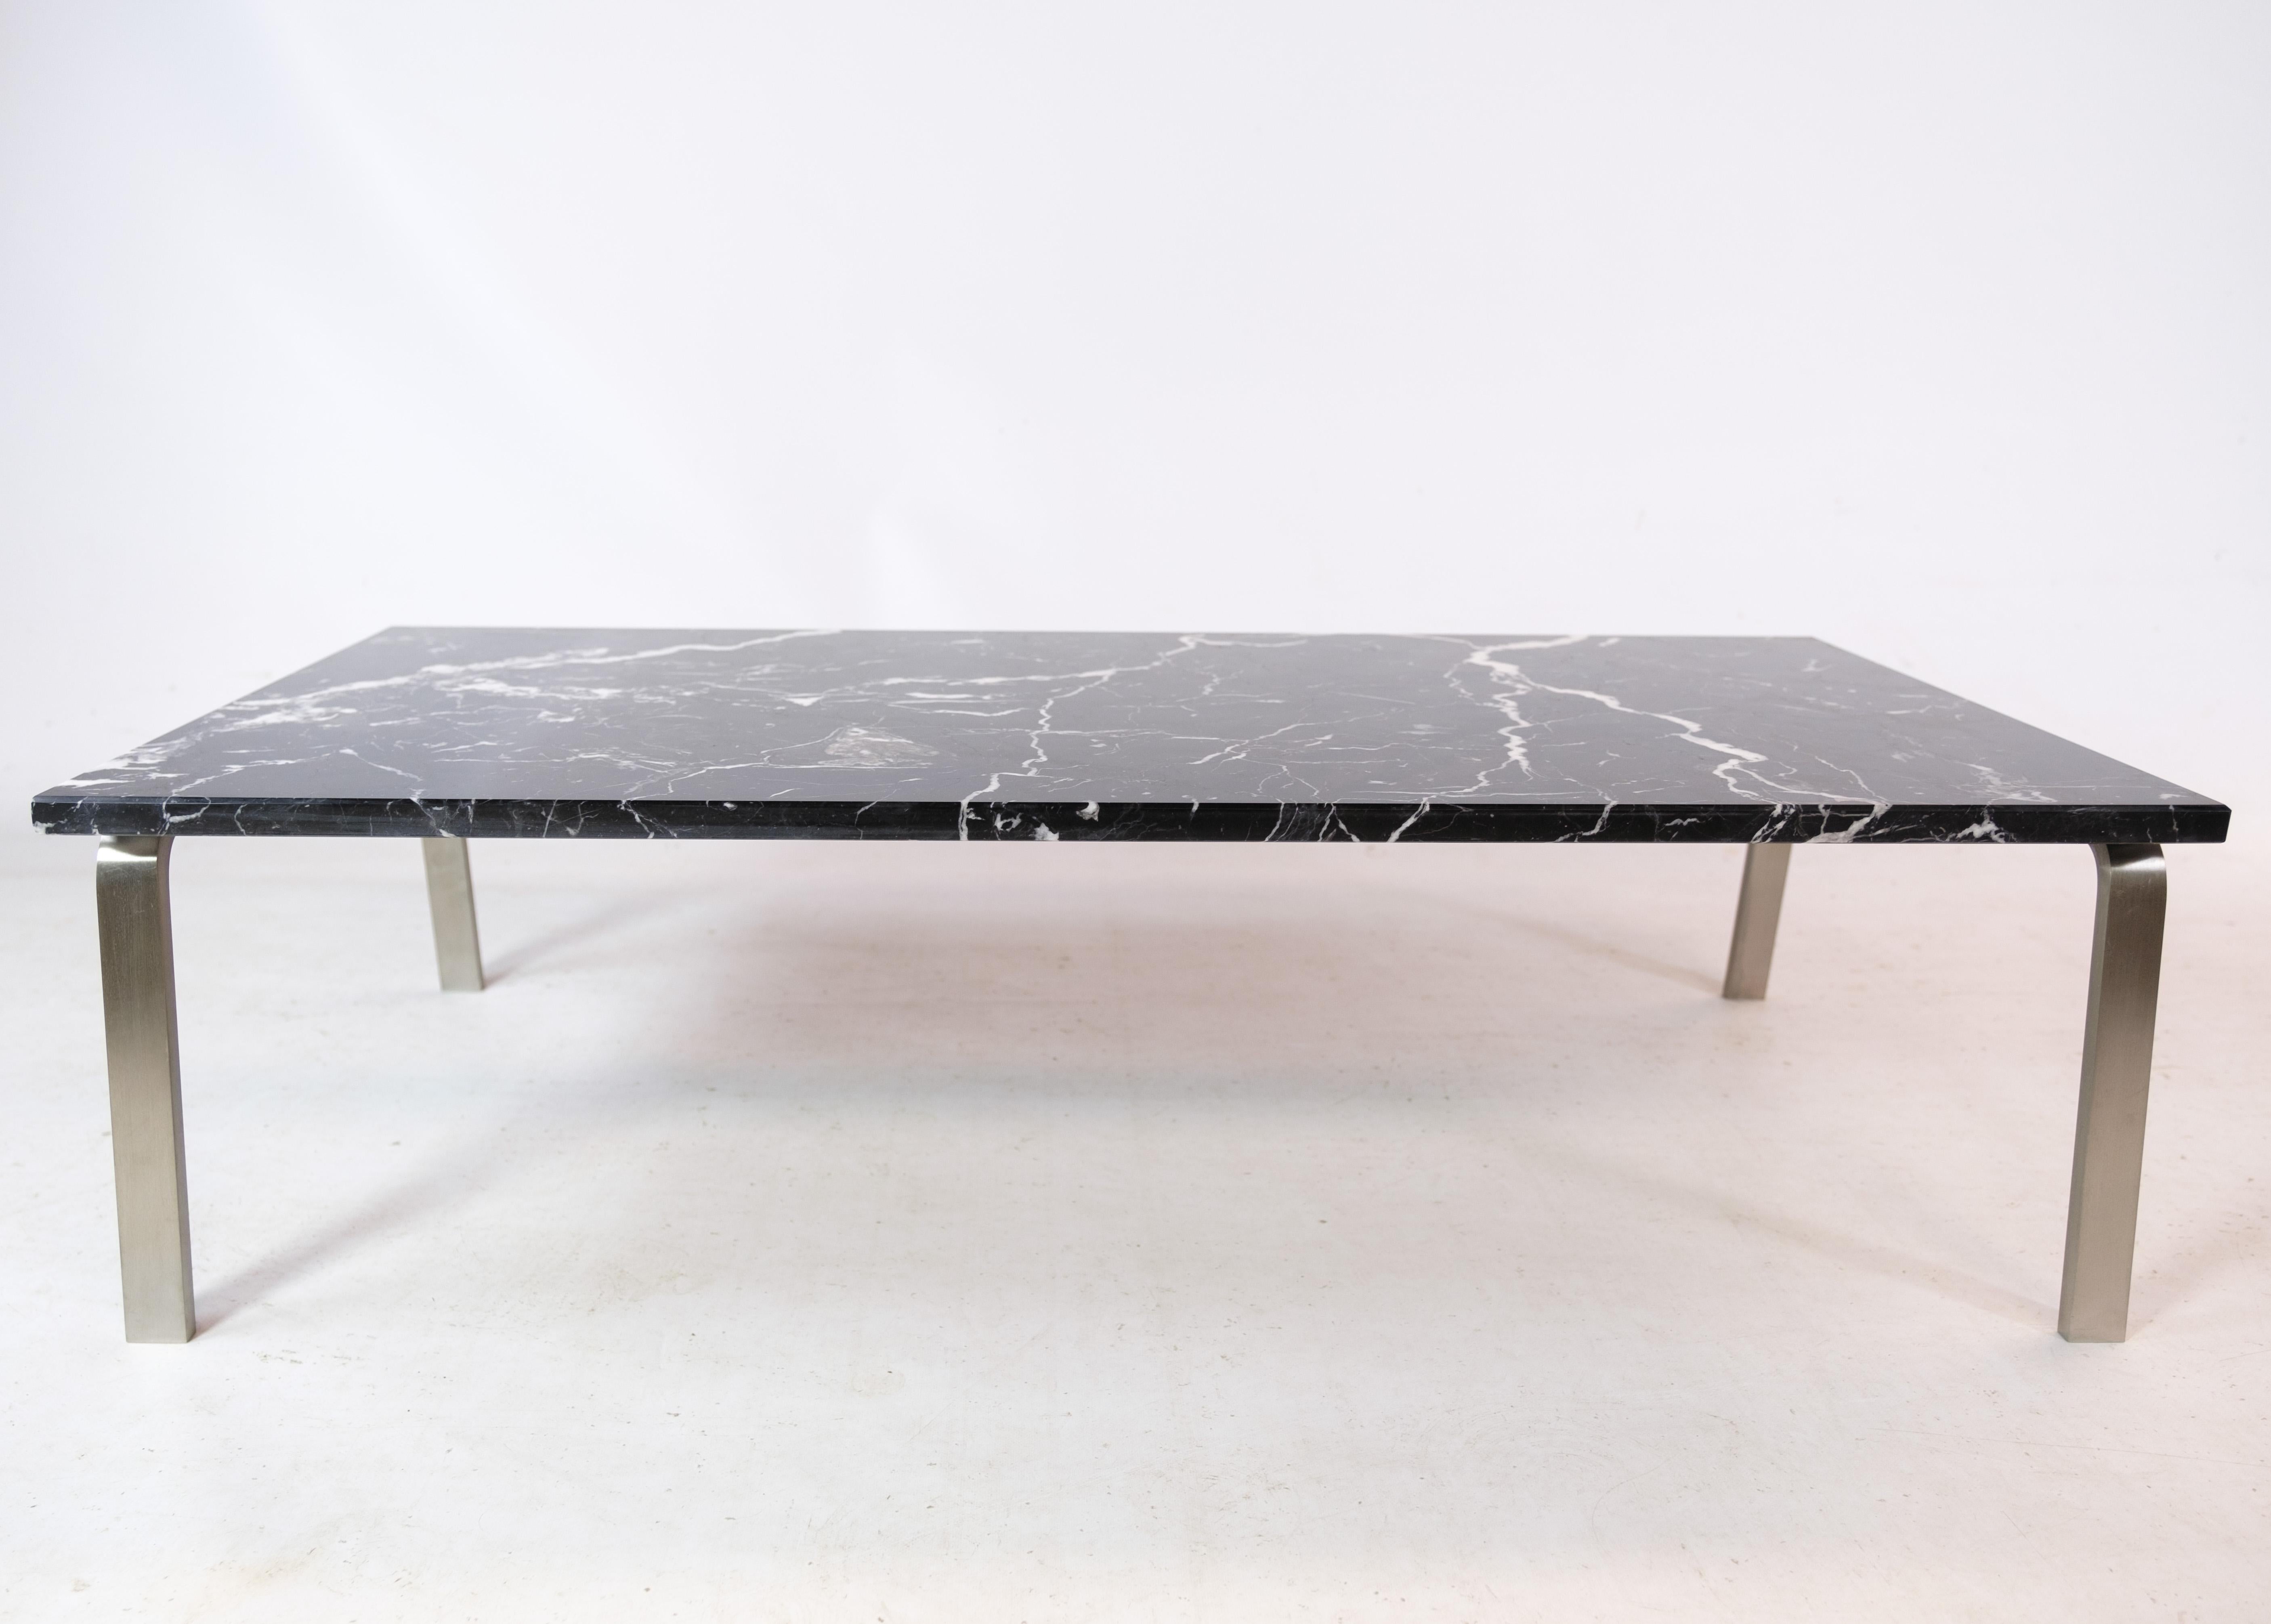 Coffee table by Norr11, featuring an aluminum frame and a luxurious Danish design marble top, crafted in the 2000s. This contemporary piece seamlessly blends modern aesthetics with timeless elegance. With its clean lines and premium materials, it